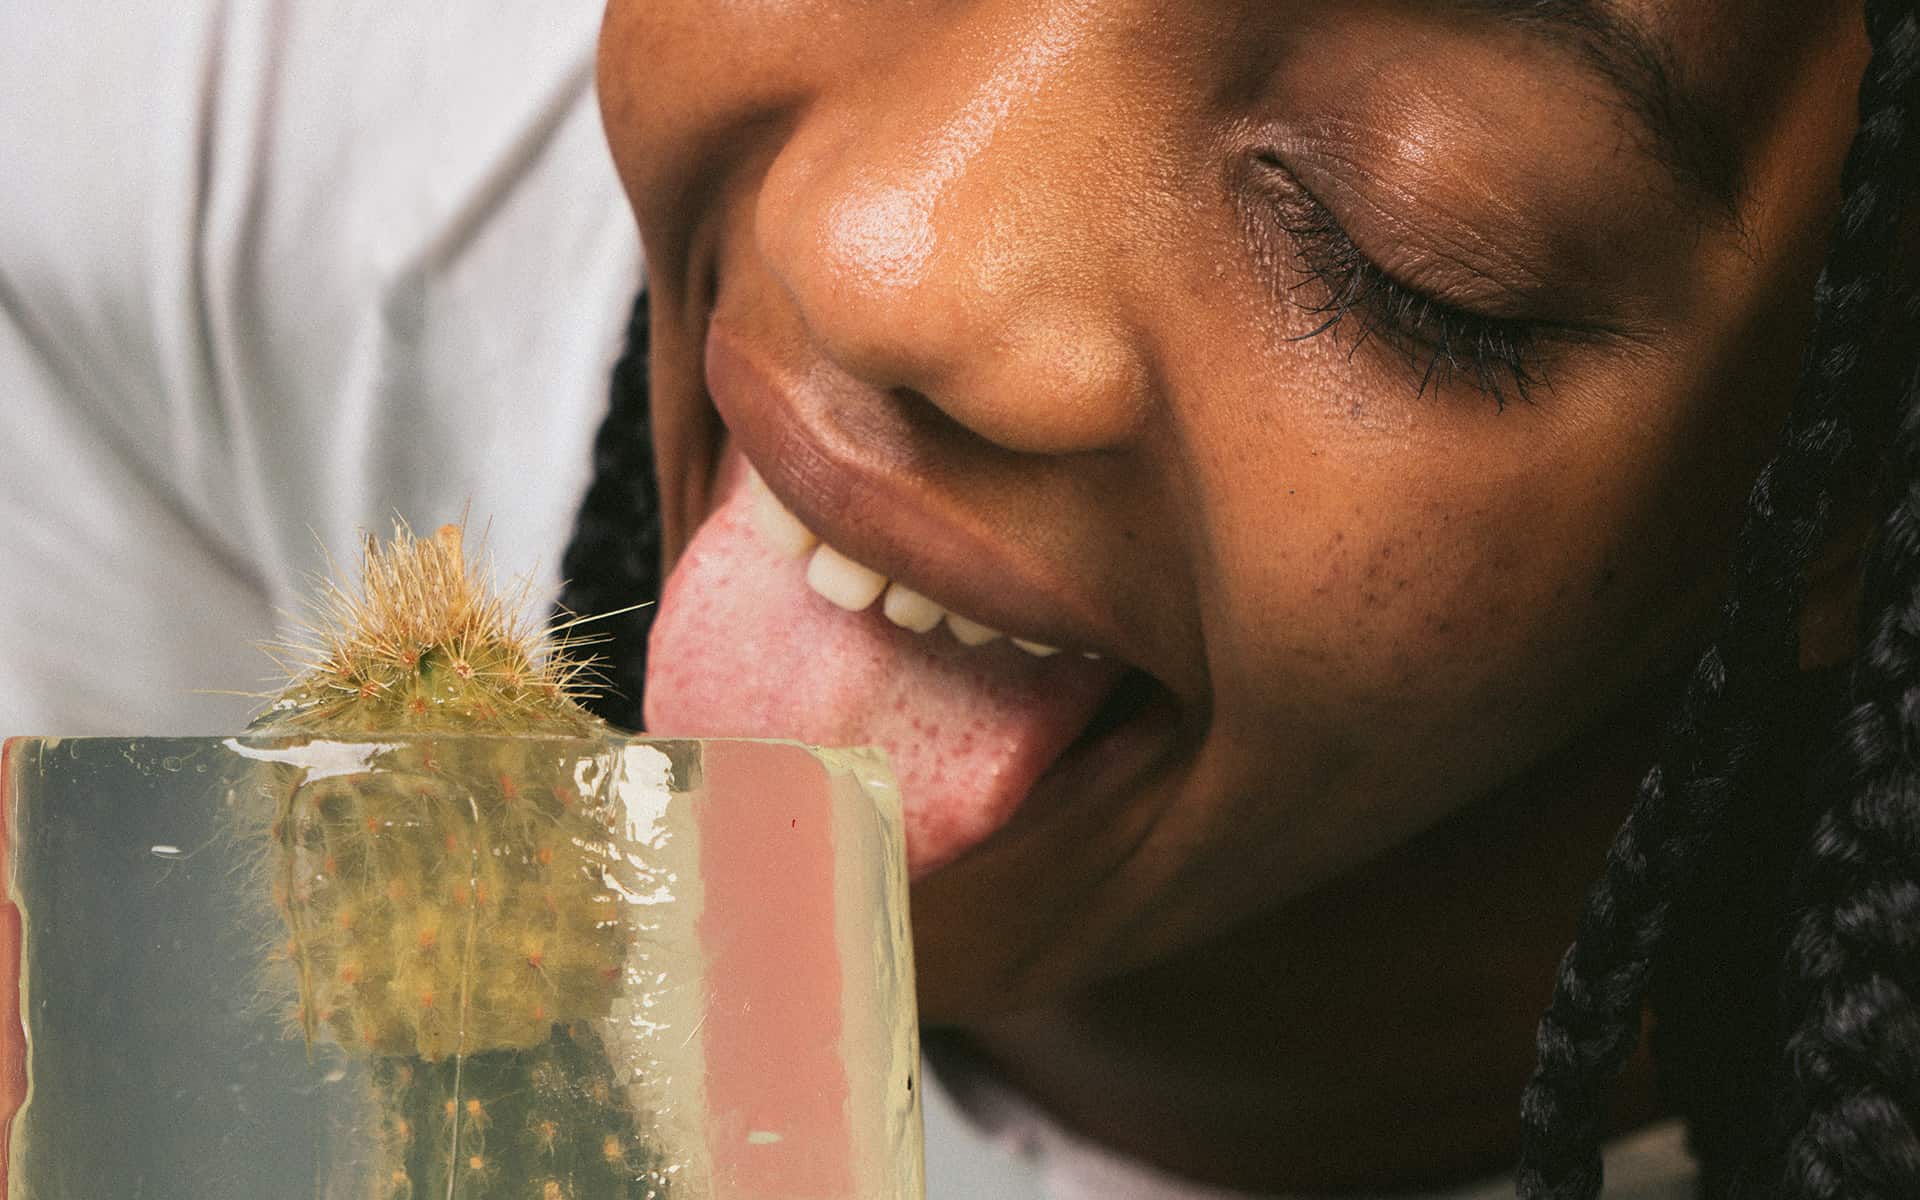 Woman licking ice-cube containing a phallic cactus 